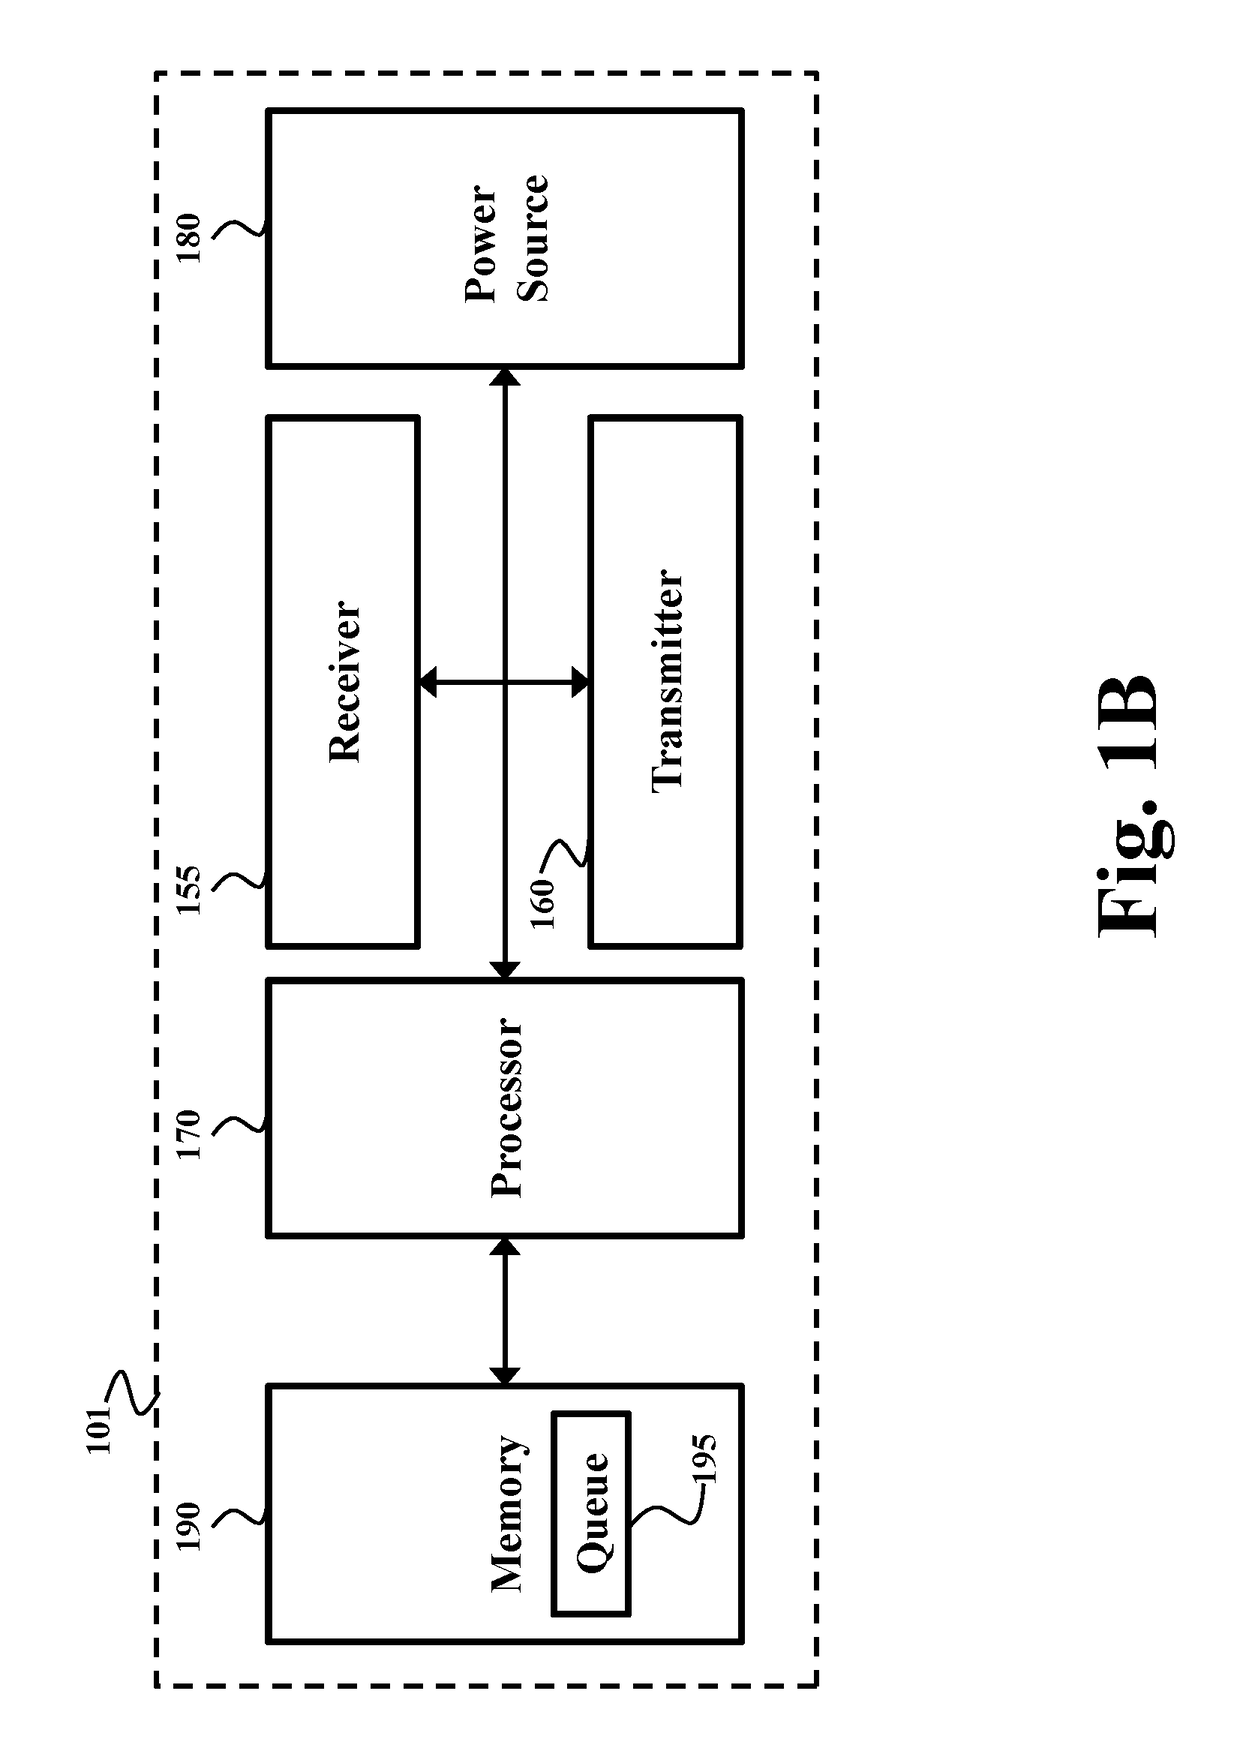 Distributed Sleep Management for Battery Powered Multi-Hop Heterogeneous Wireless Network